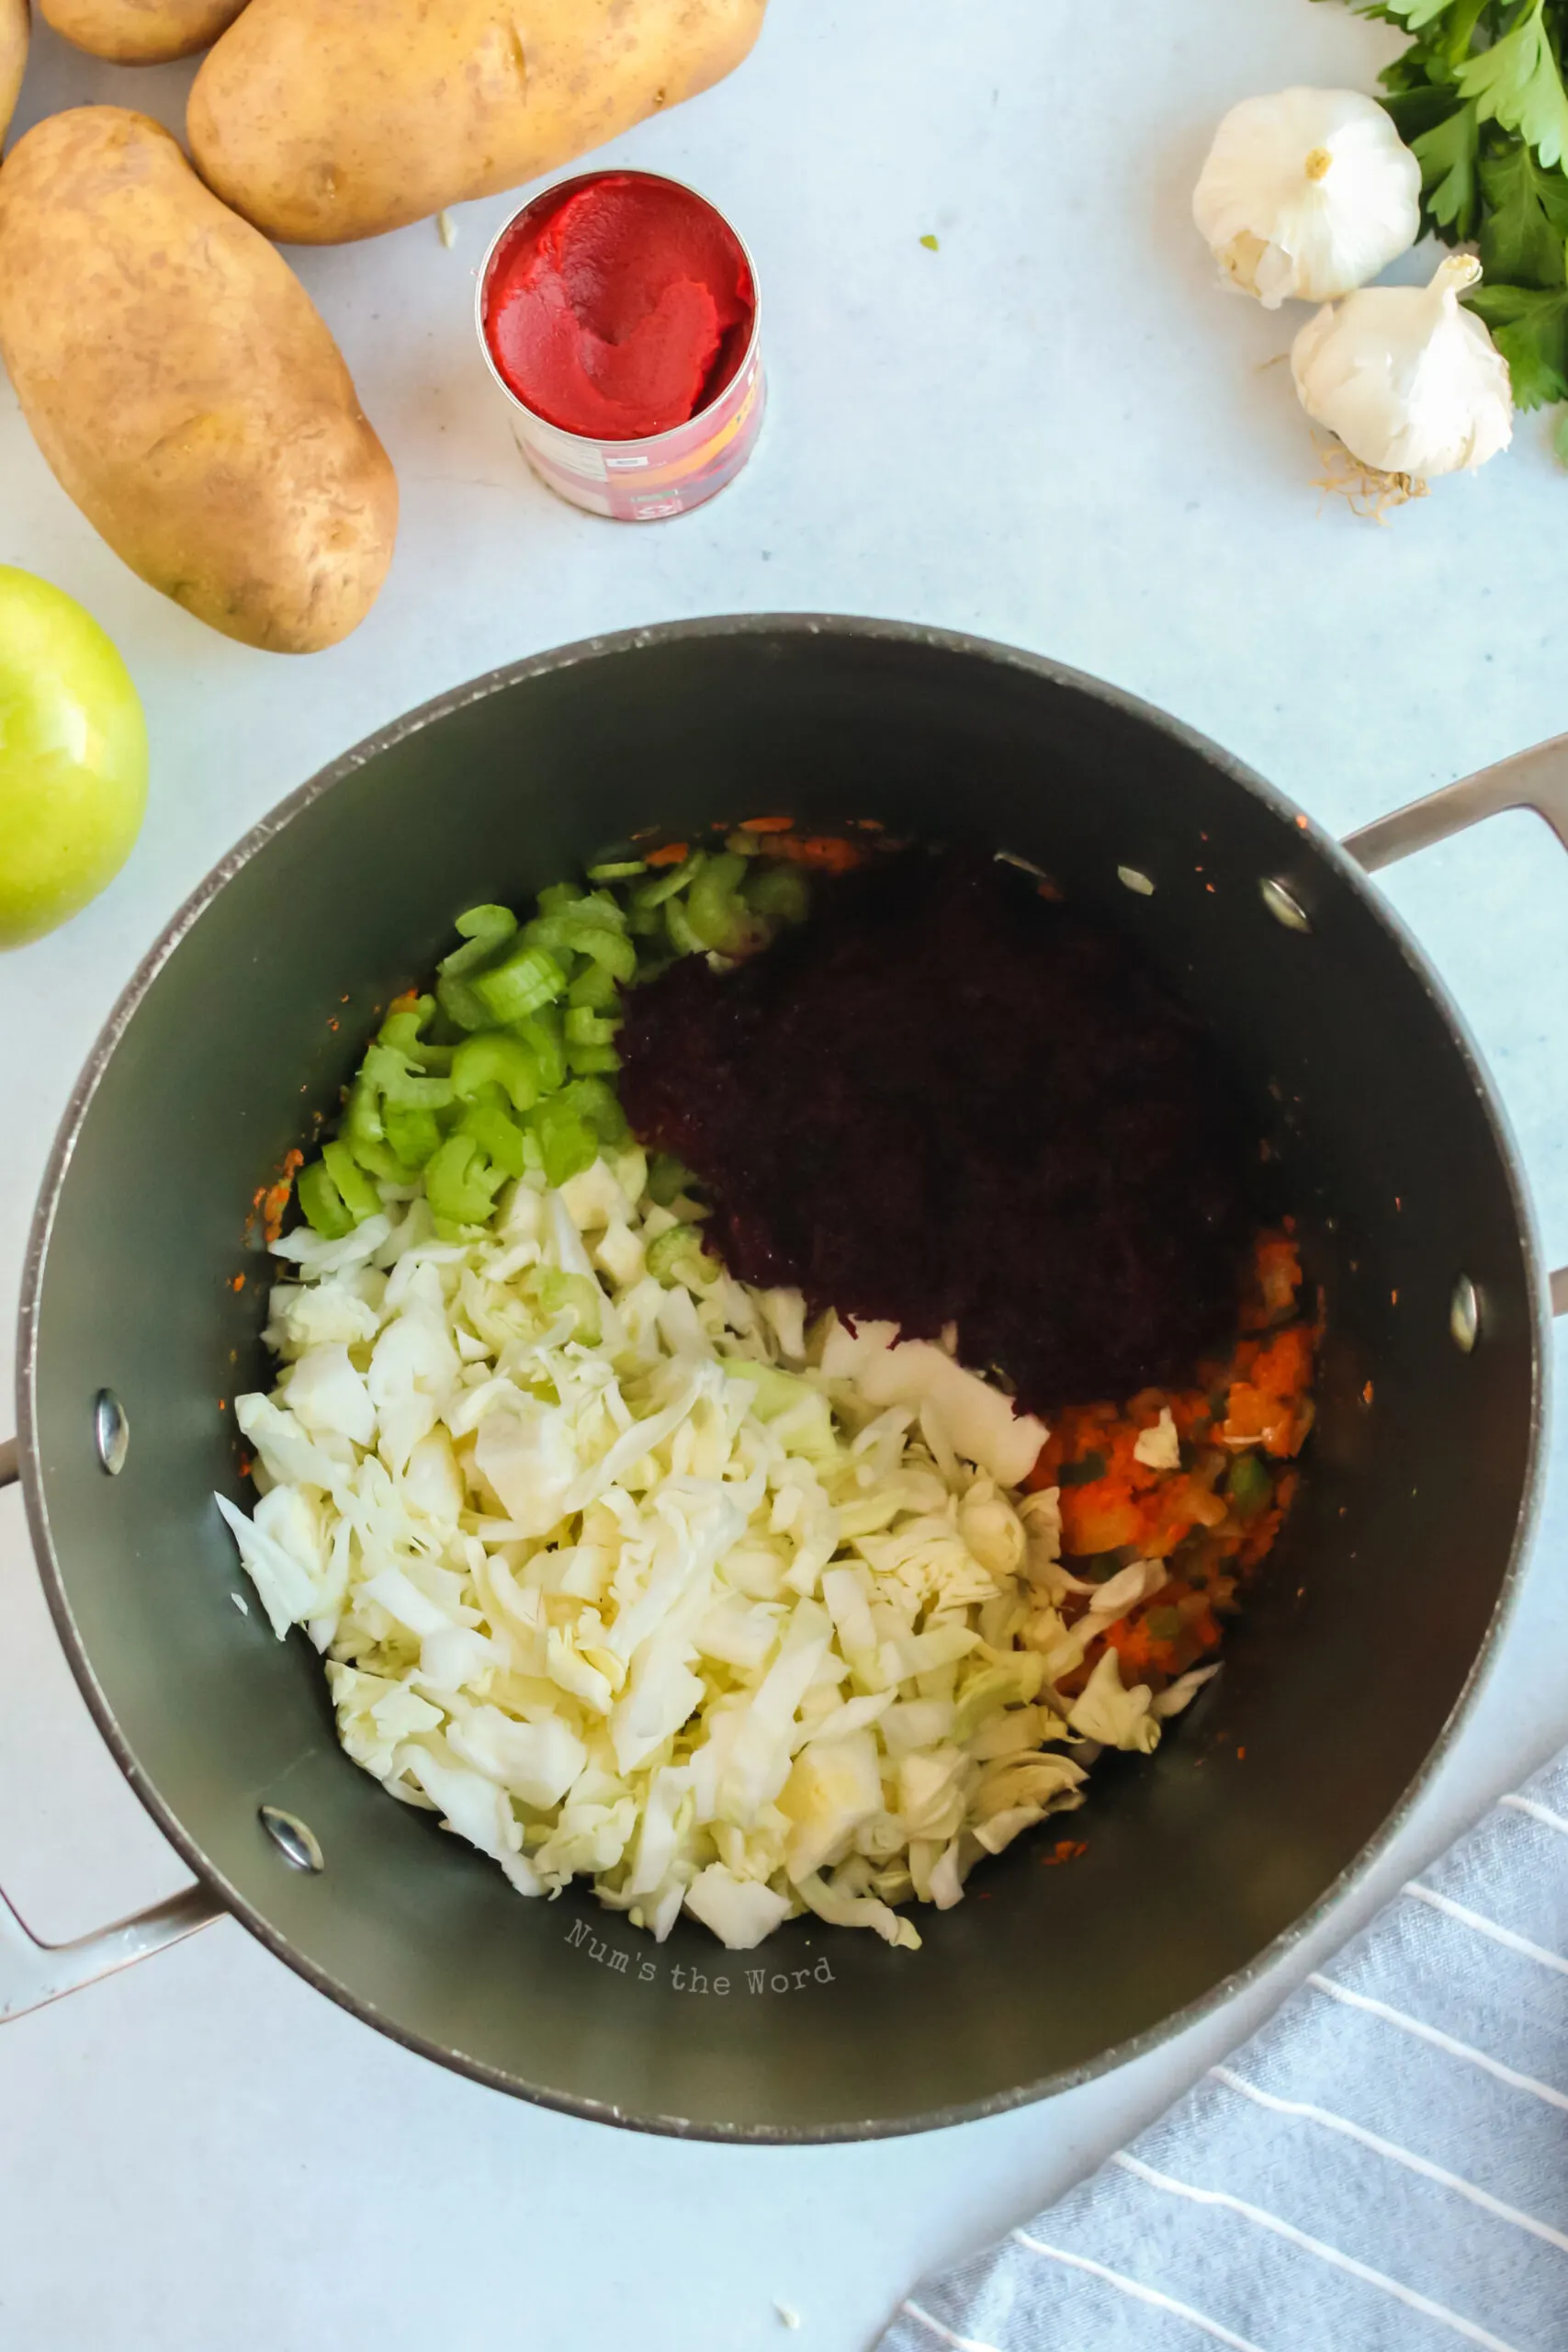 Cabbage, beet and celery added to butter mixture in borscht pot